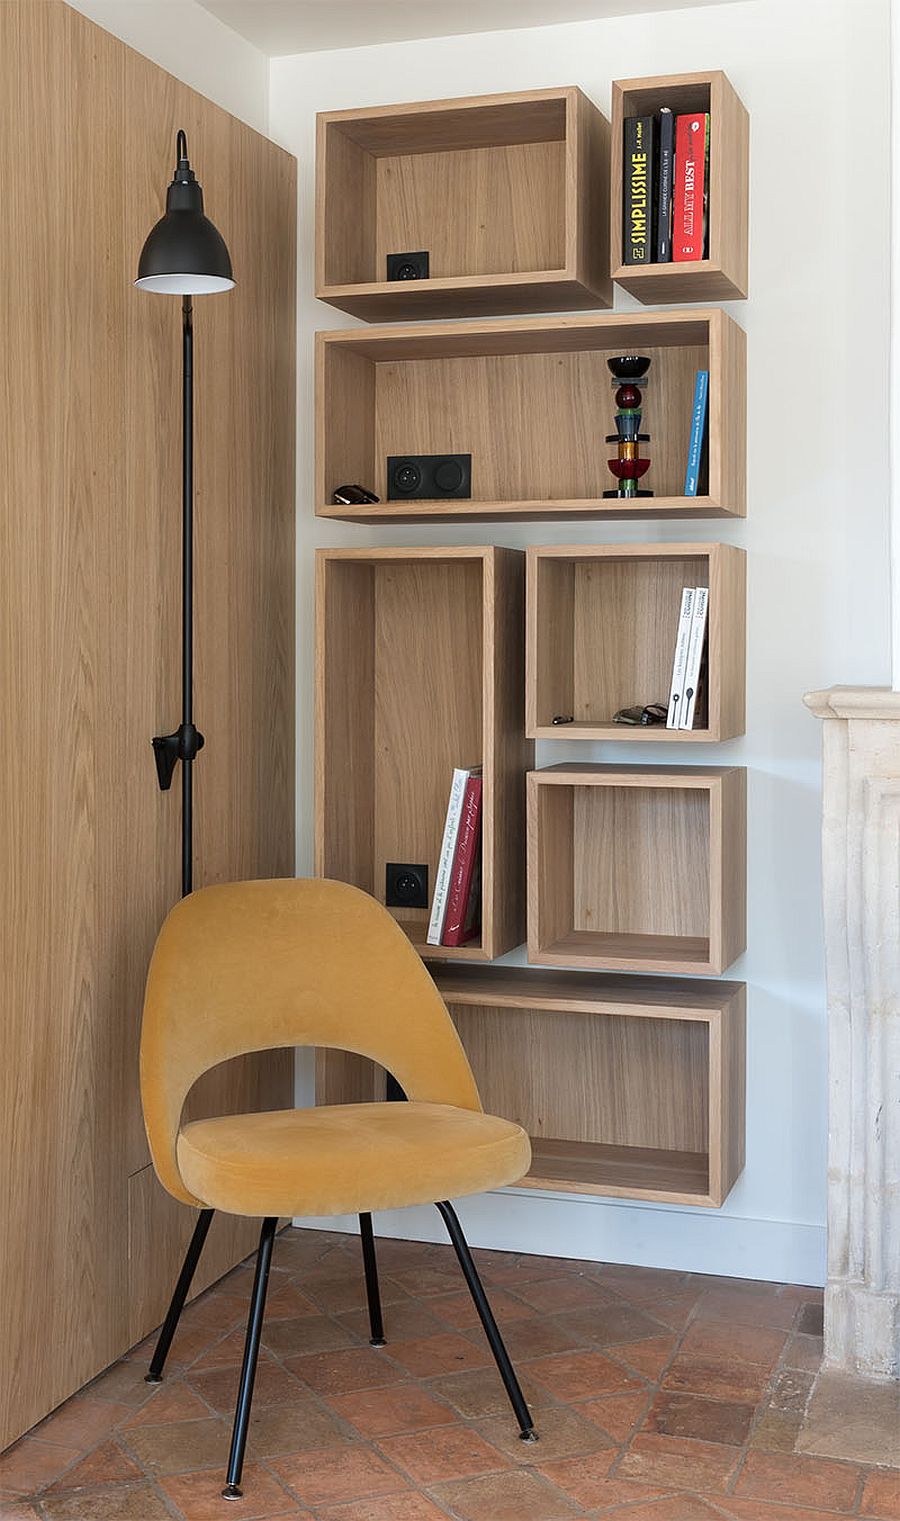 Space-savvy-wooden-boxes-made-from-oak-can-fit-in-pretty-much-anywhere-98528